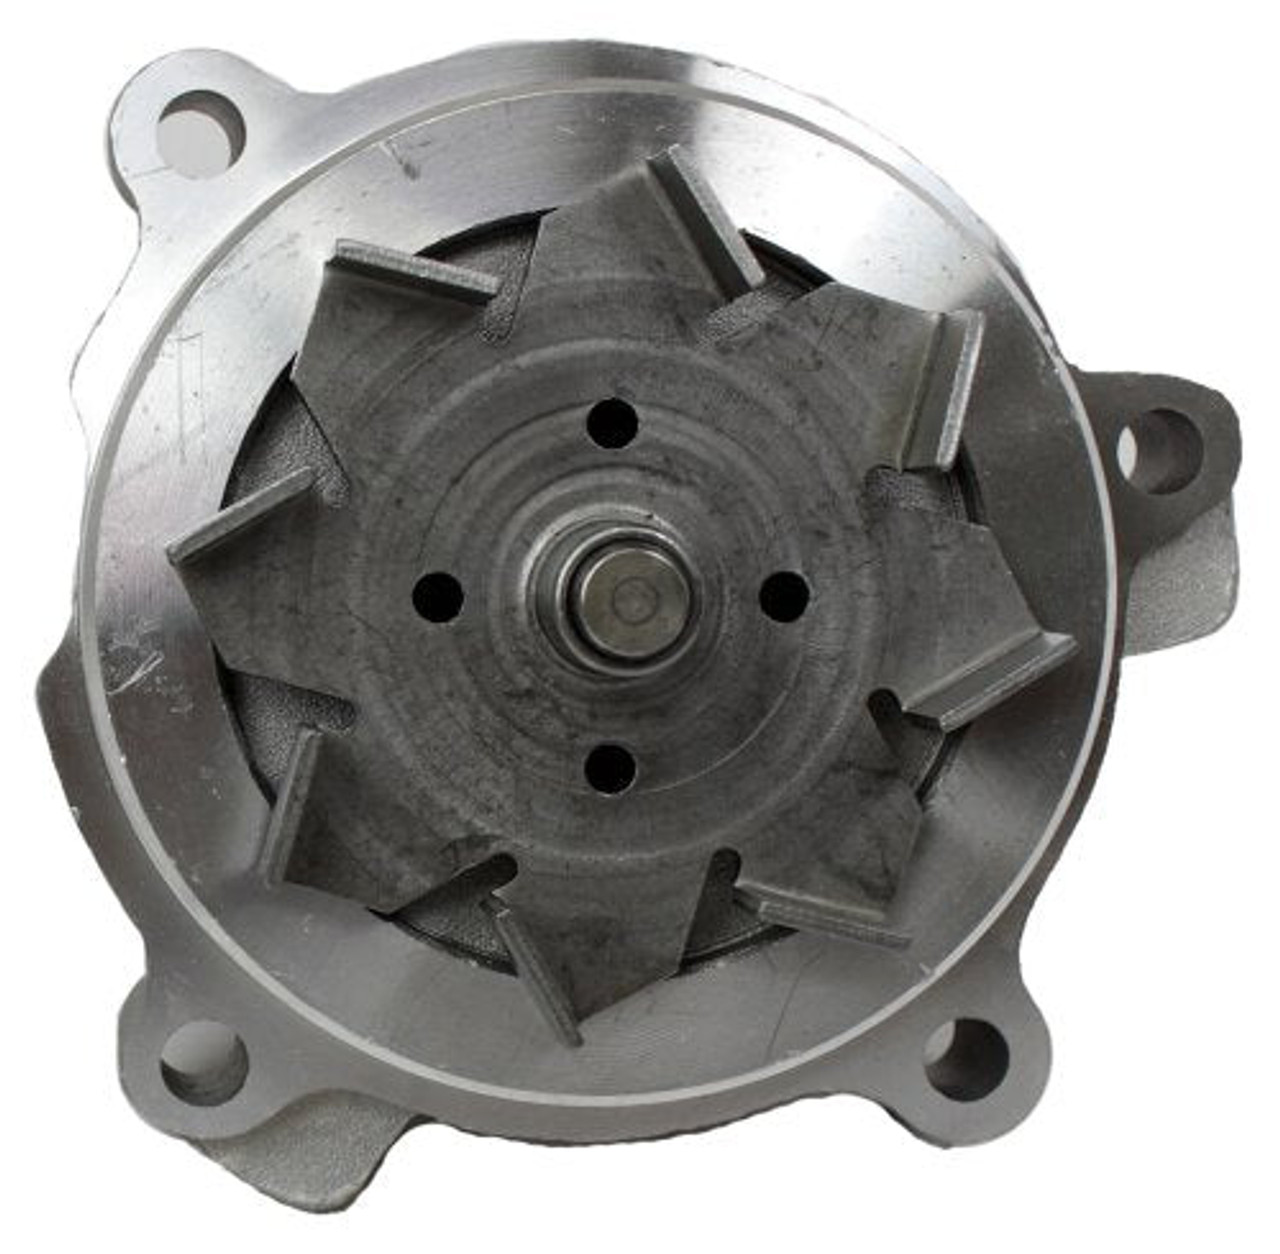 Water Pump - 1997 Ford Thunderbird 4.6L Engine Parts # WP4131ZE18